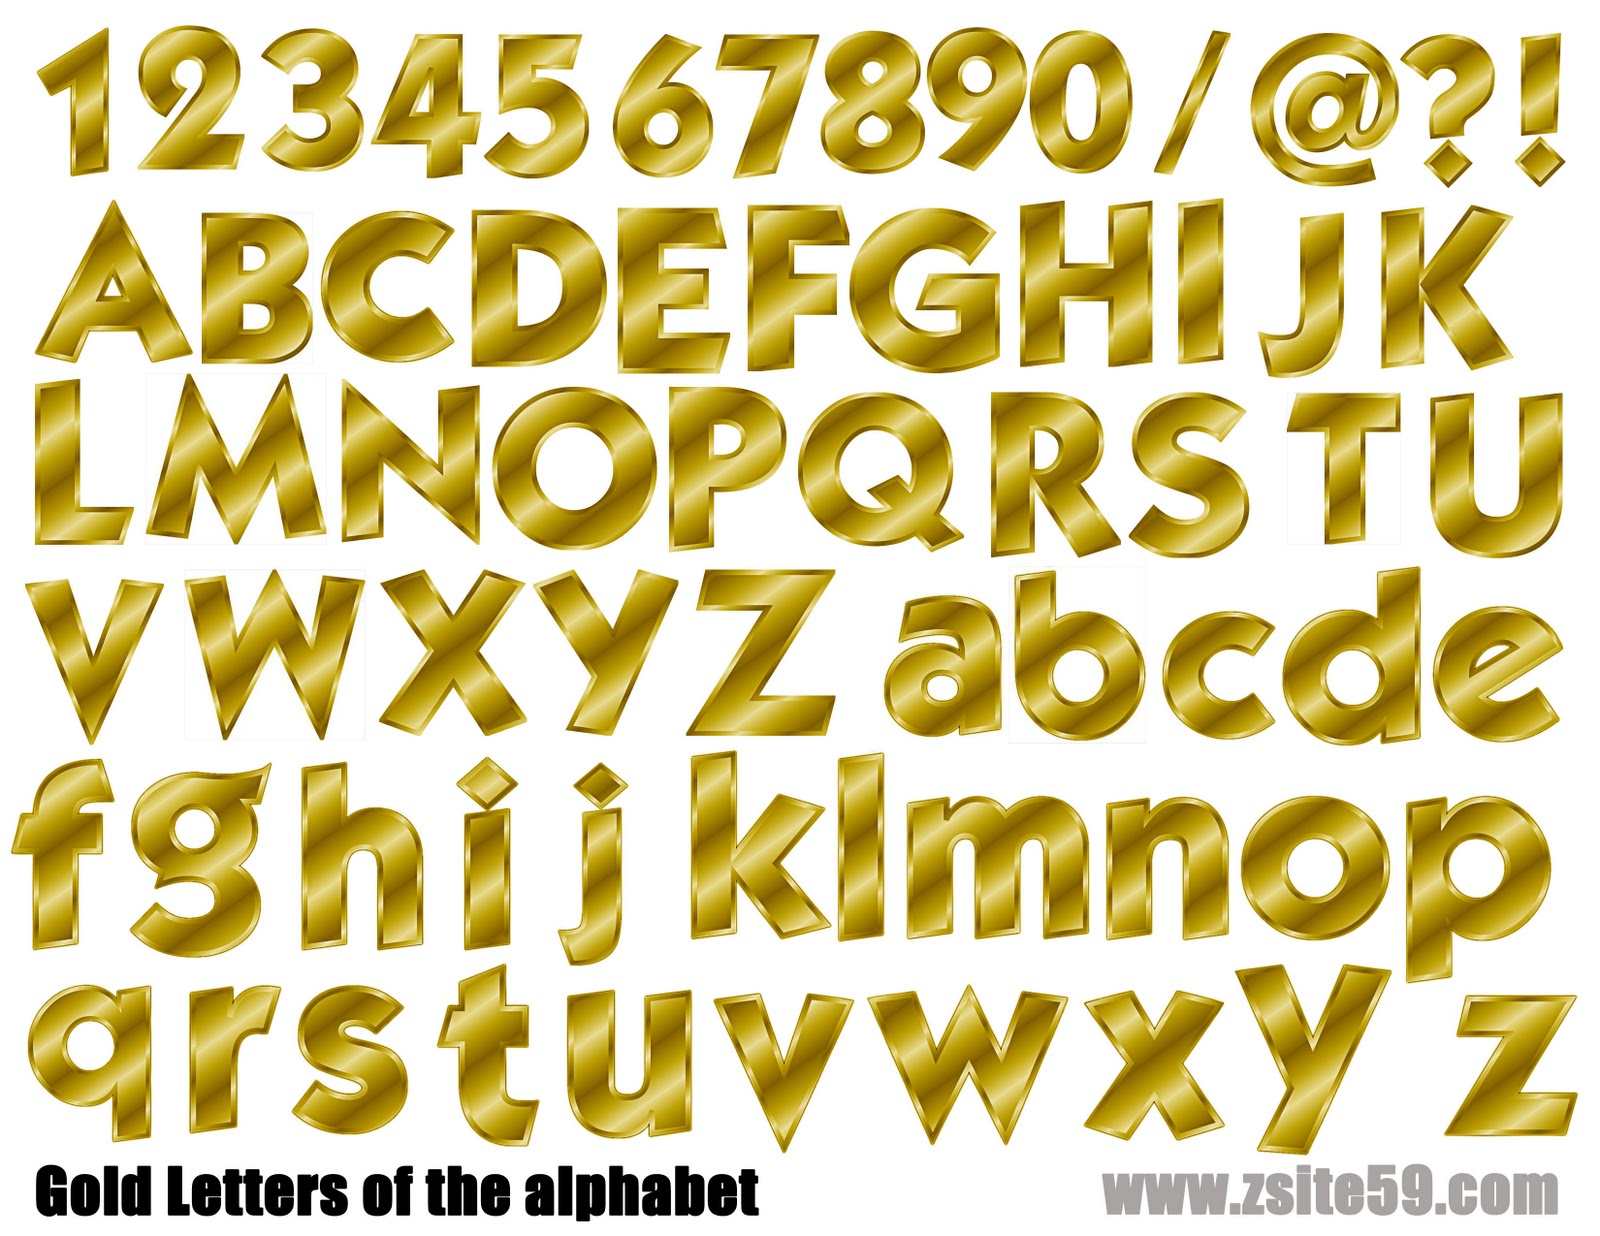 z59 faqs and stories gold letters of the alphabet